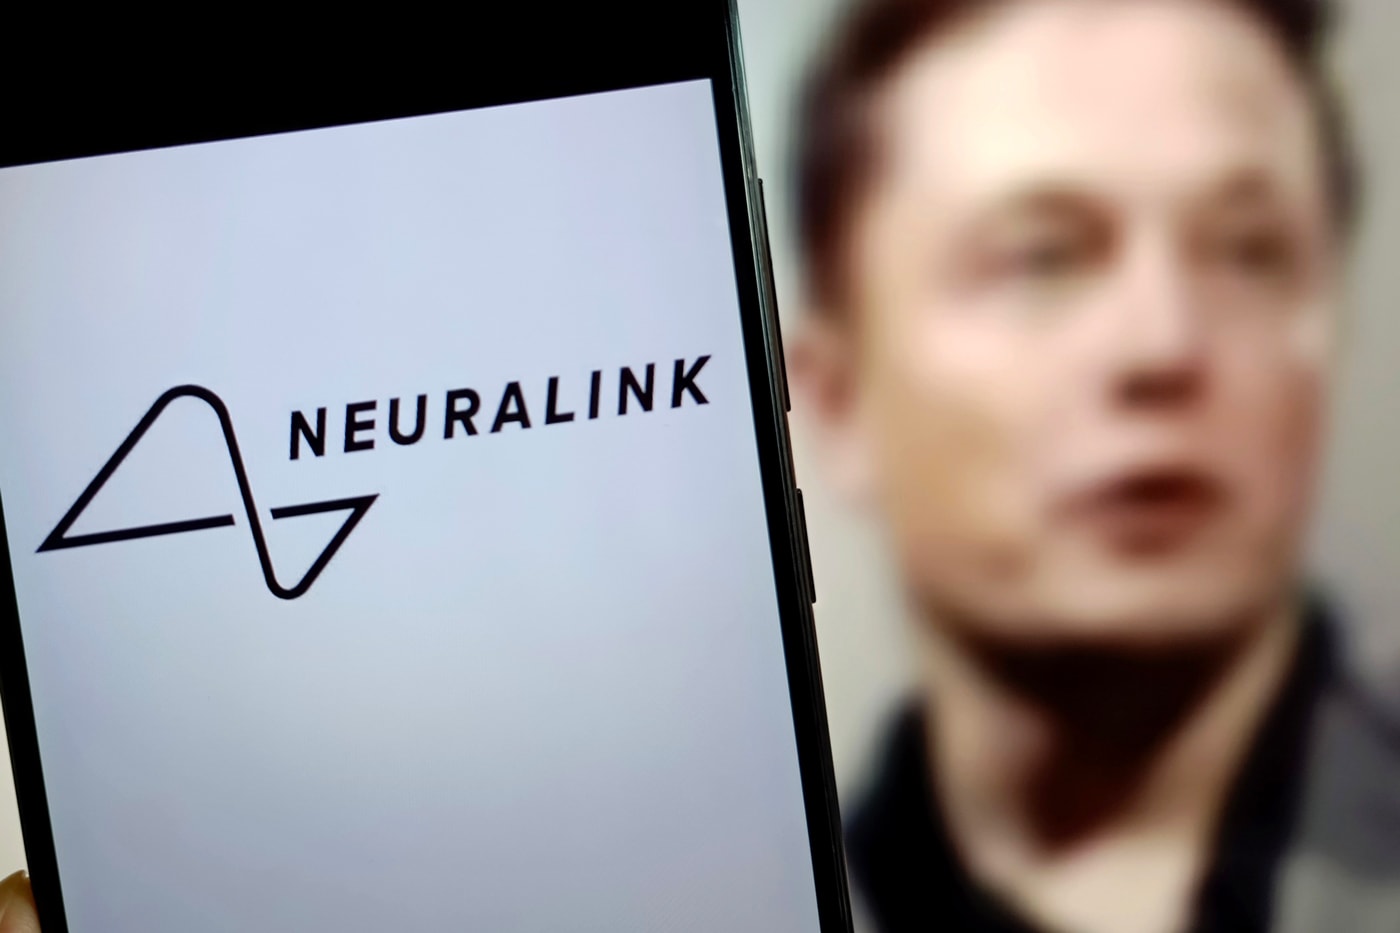 elon musk Neuralink Searching For Human Subjects PRIME Study